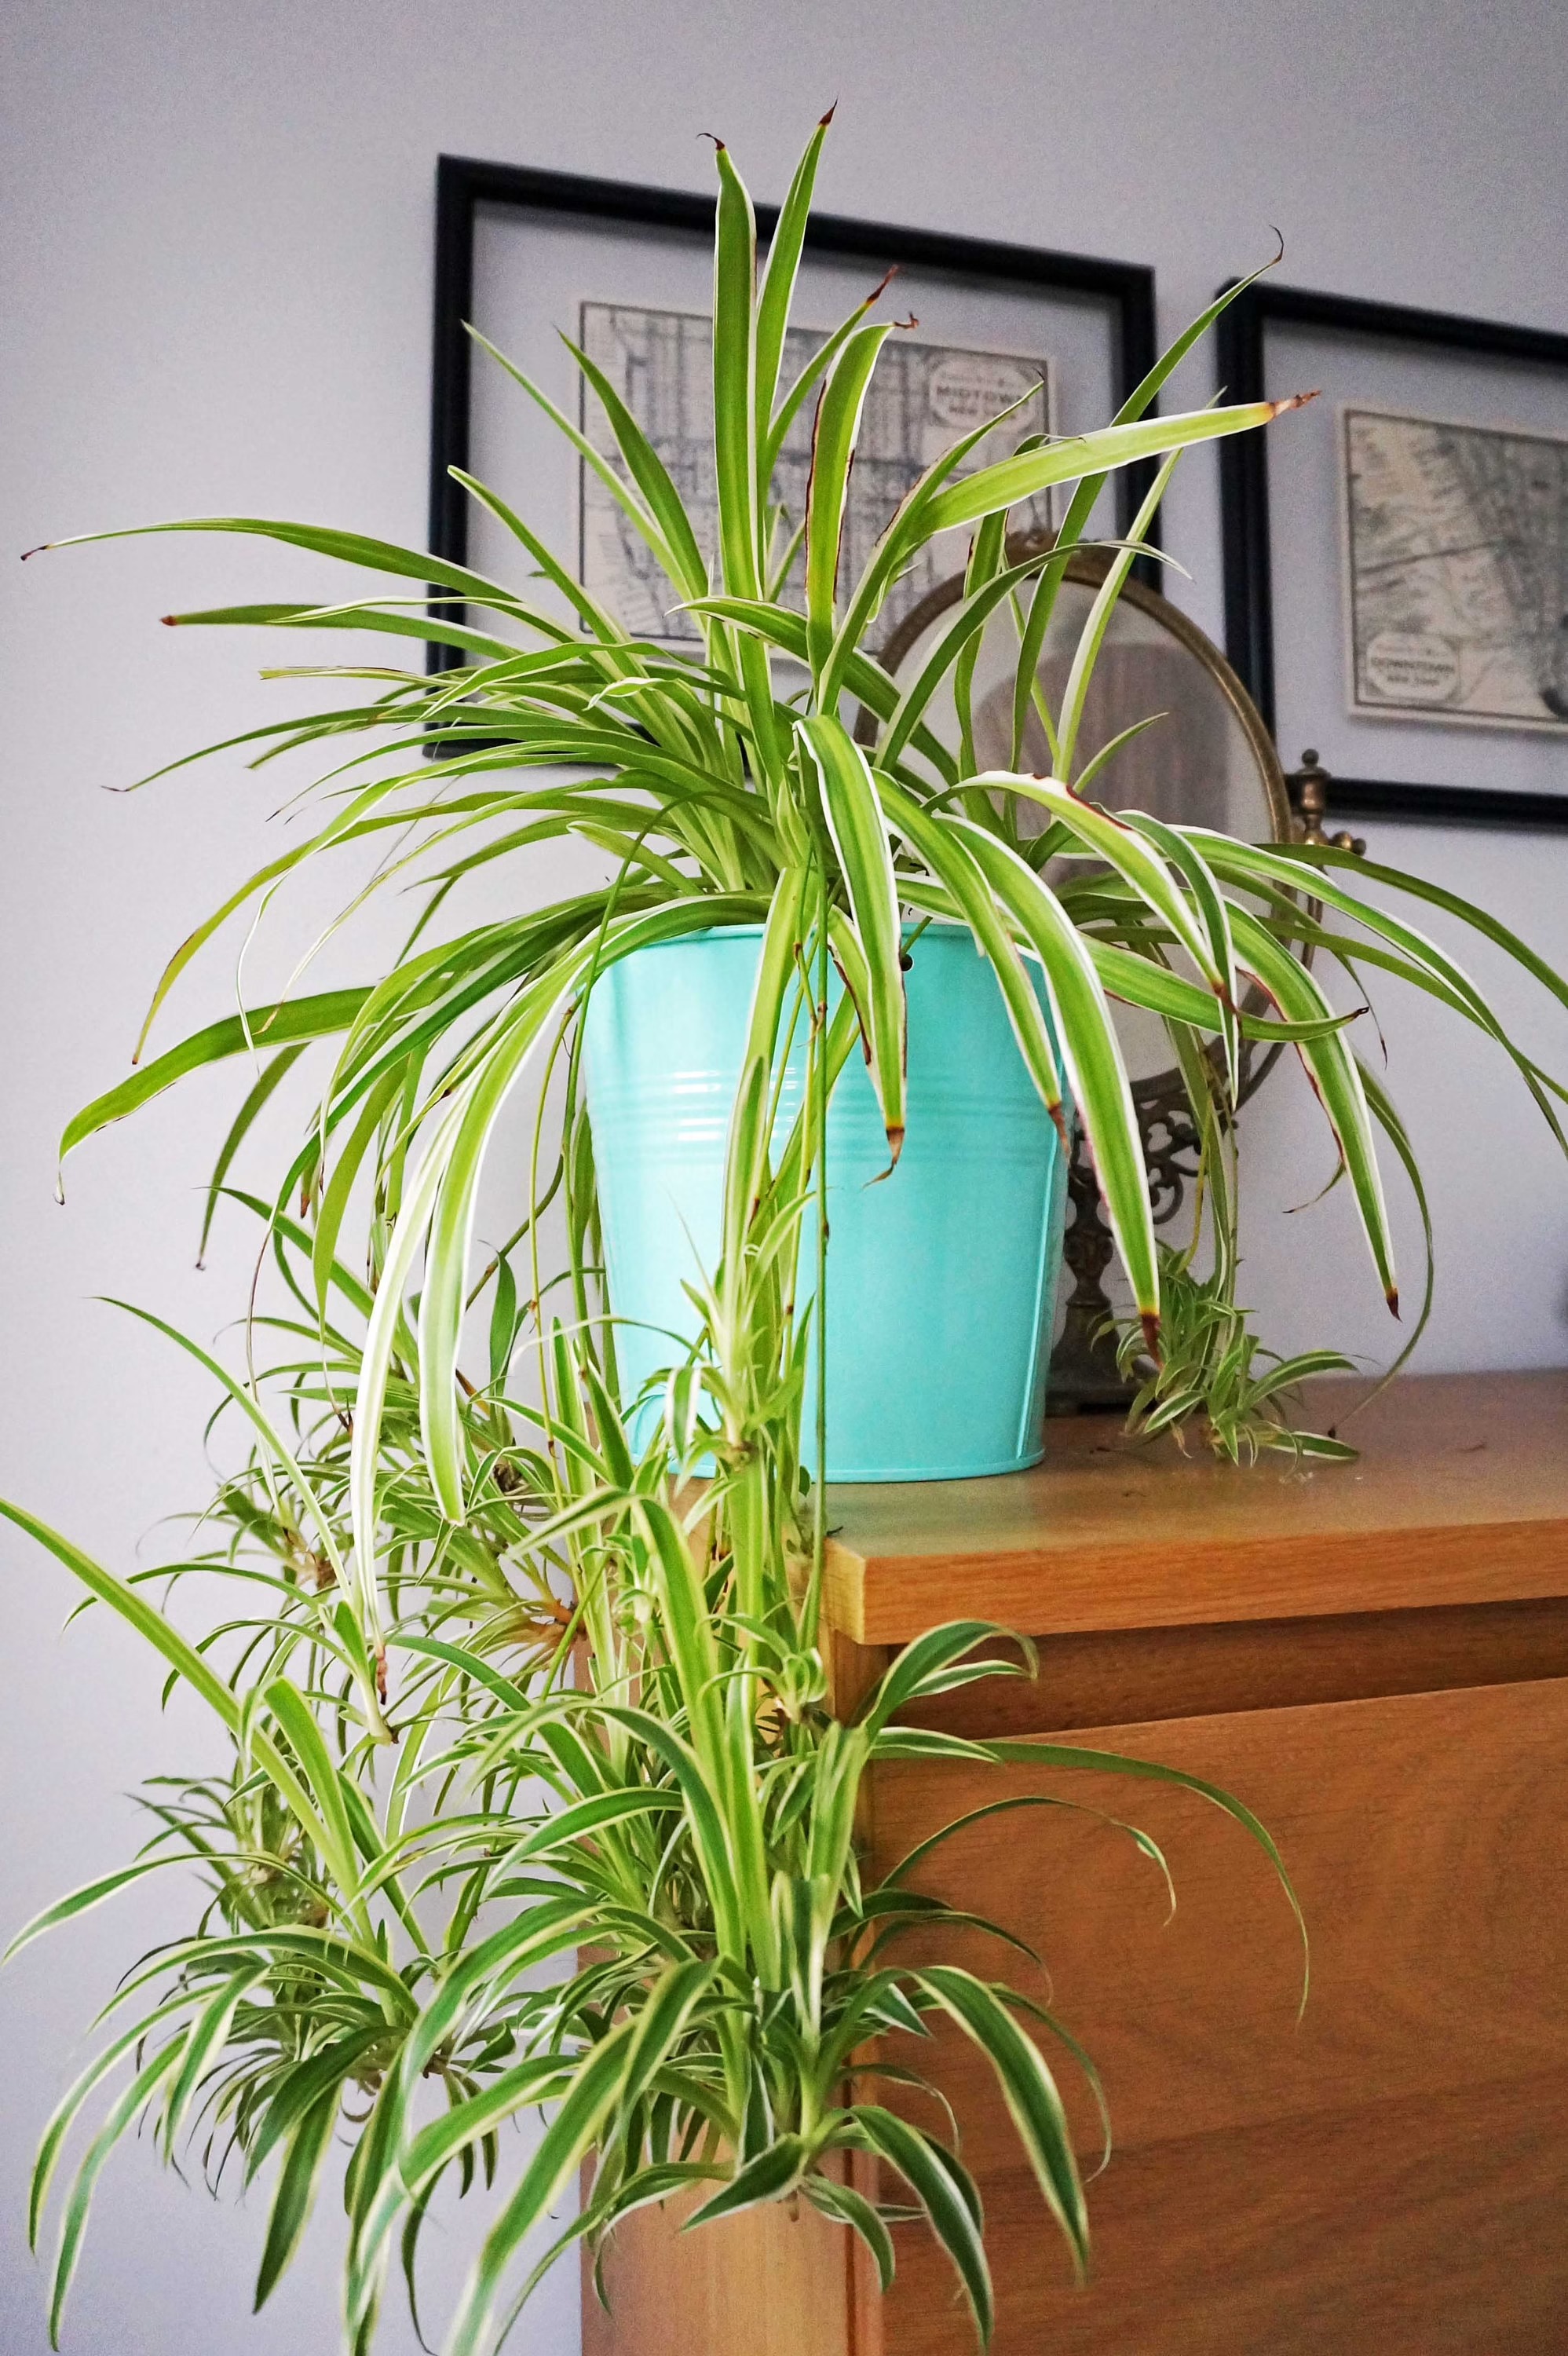 20 Air Purifier Houseplants You Should Grow In The Home - 163